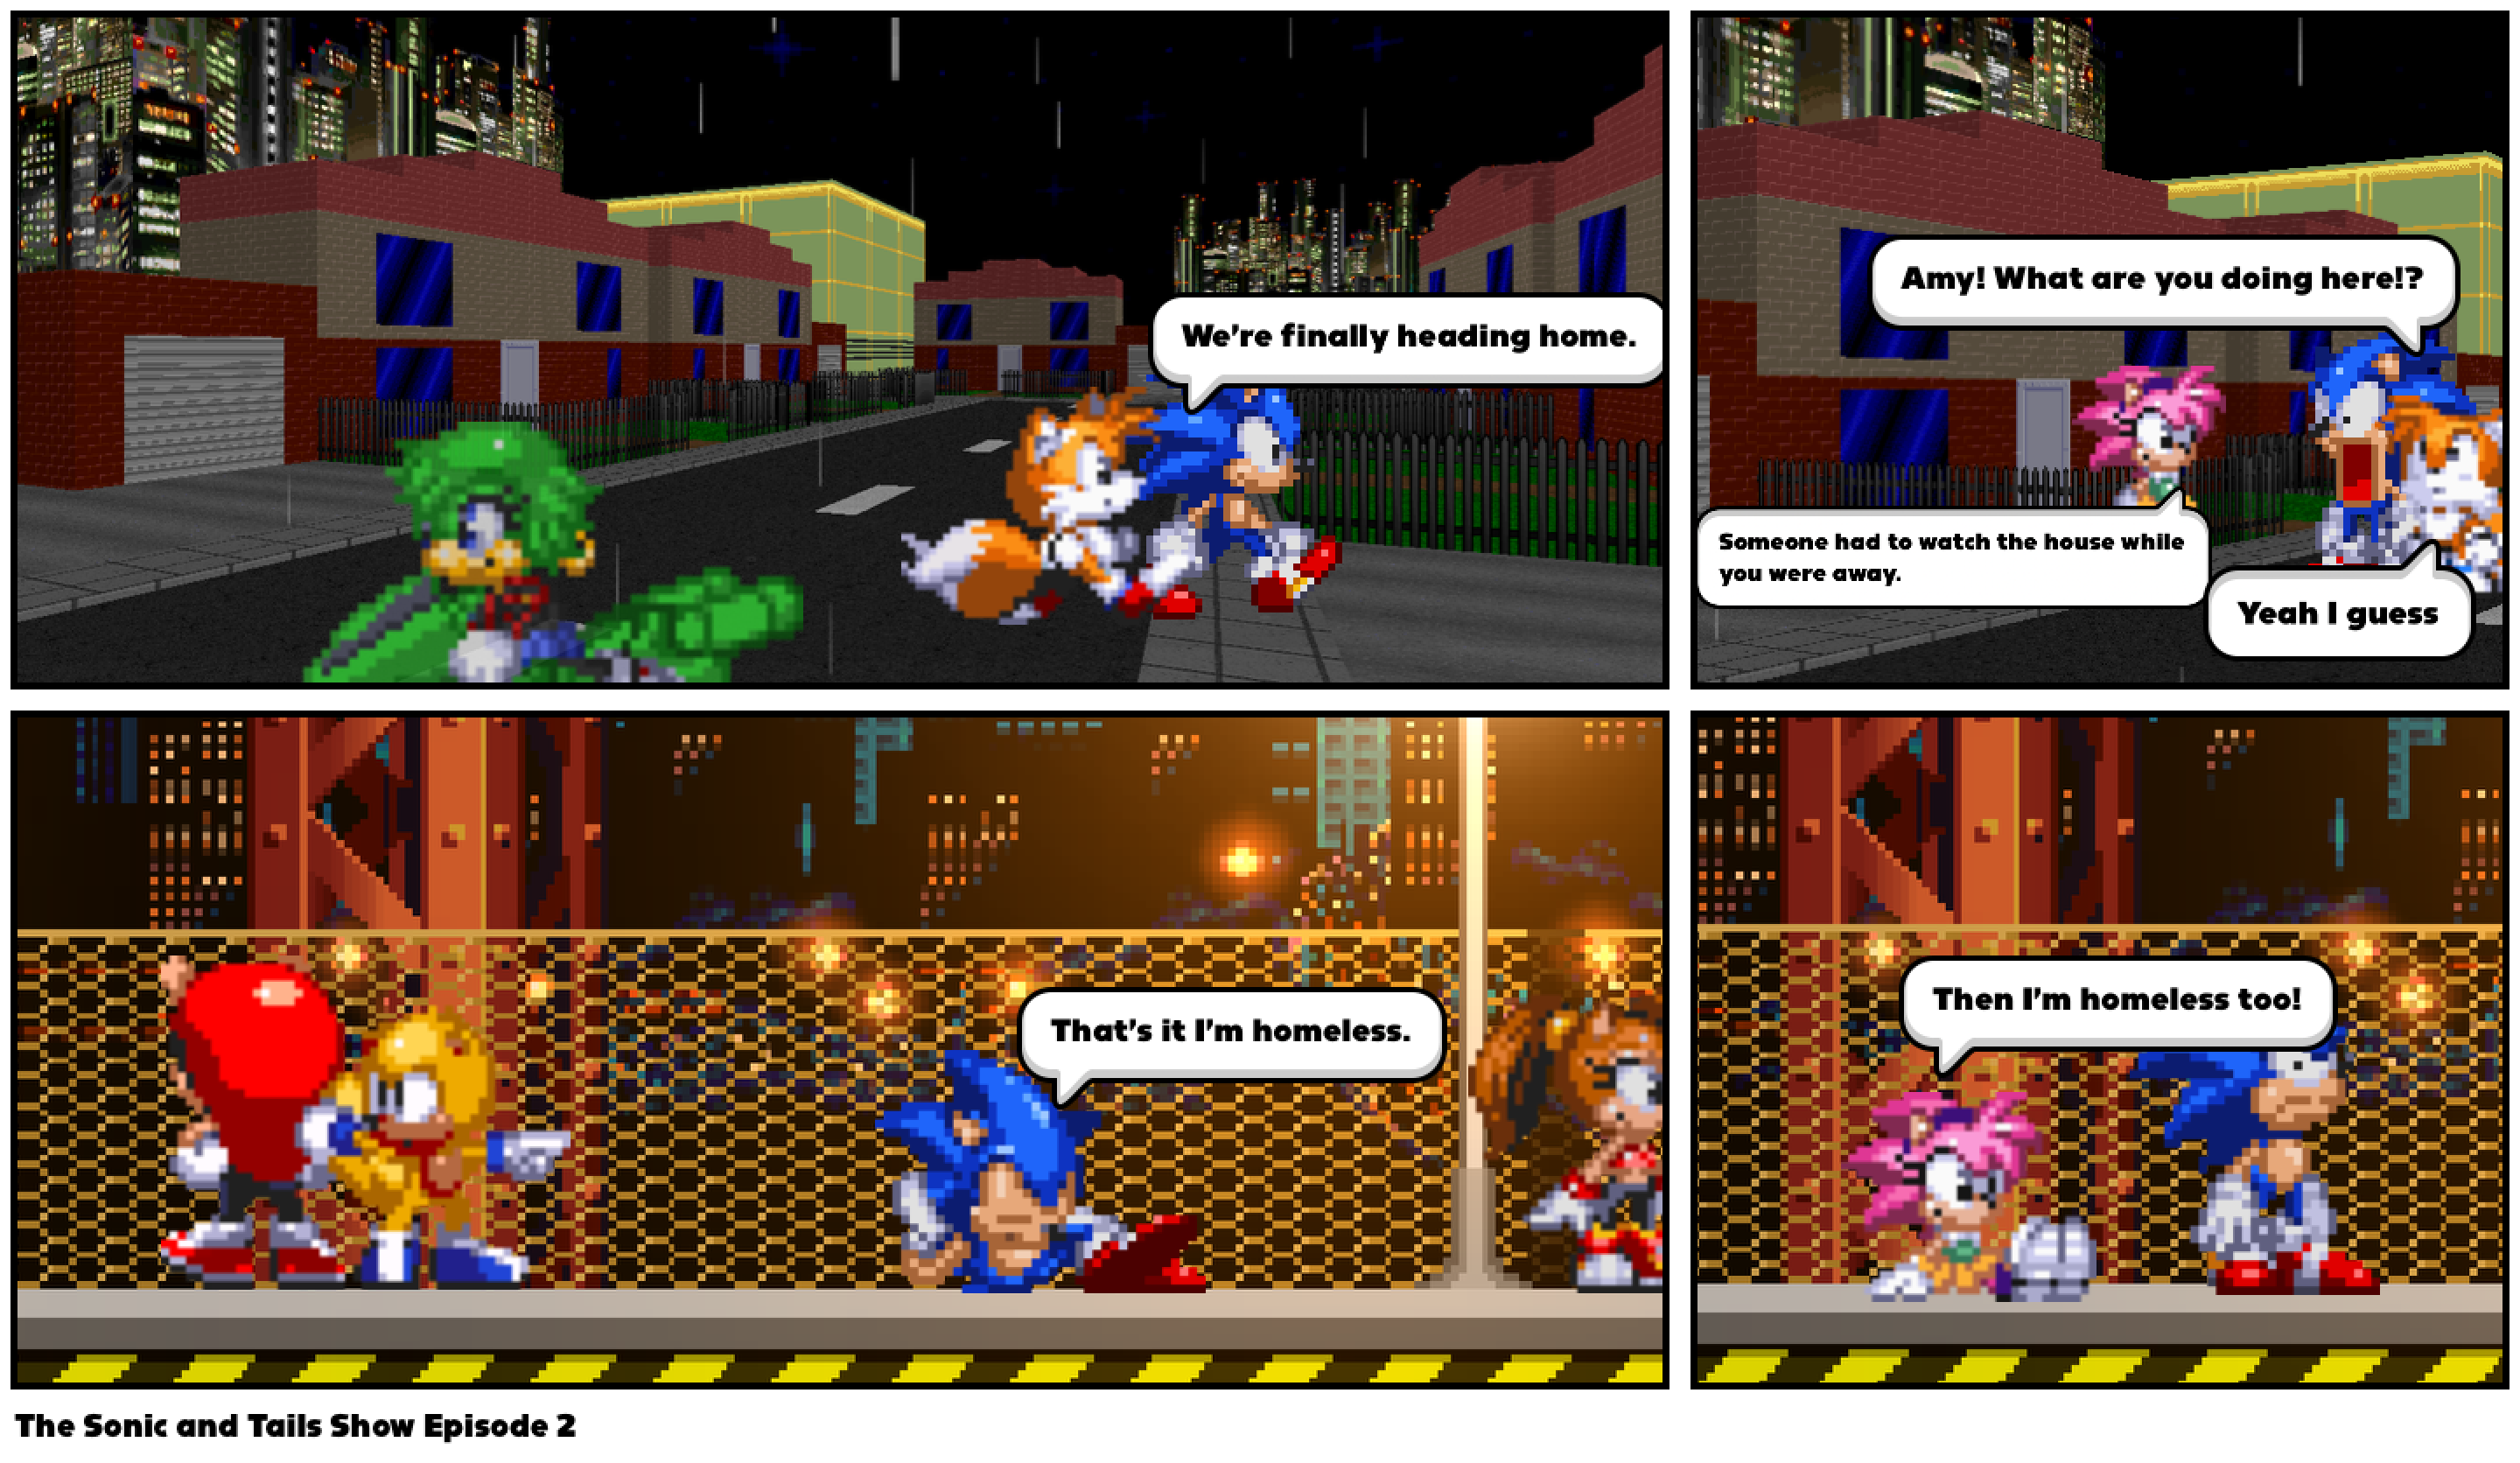 The Sonic and Tails Show Episode 2